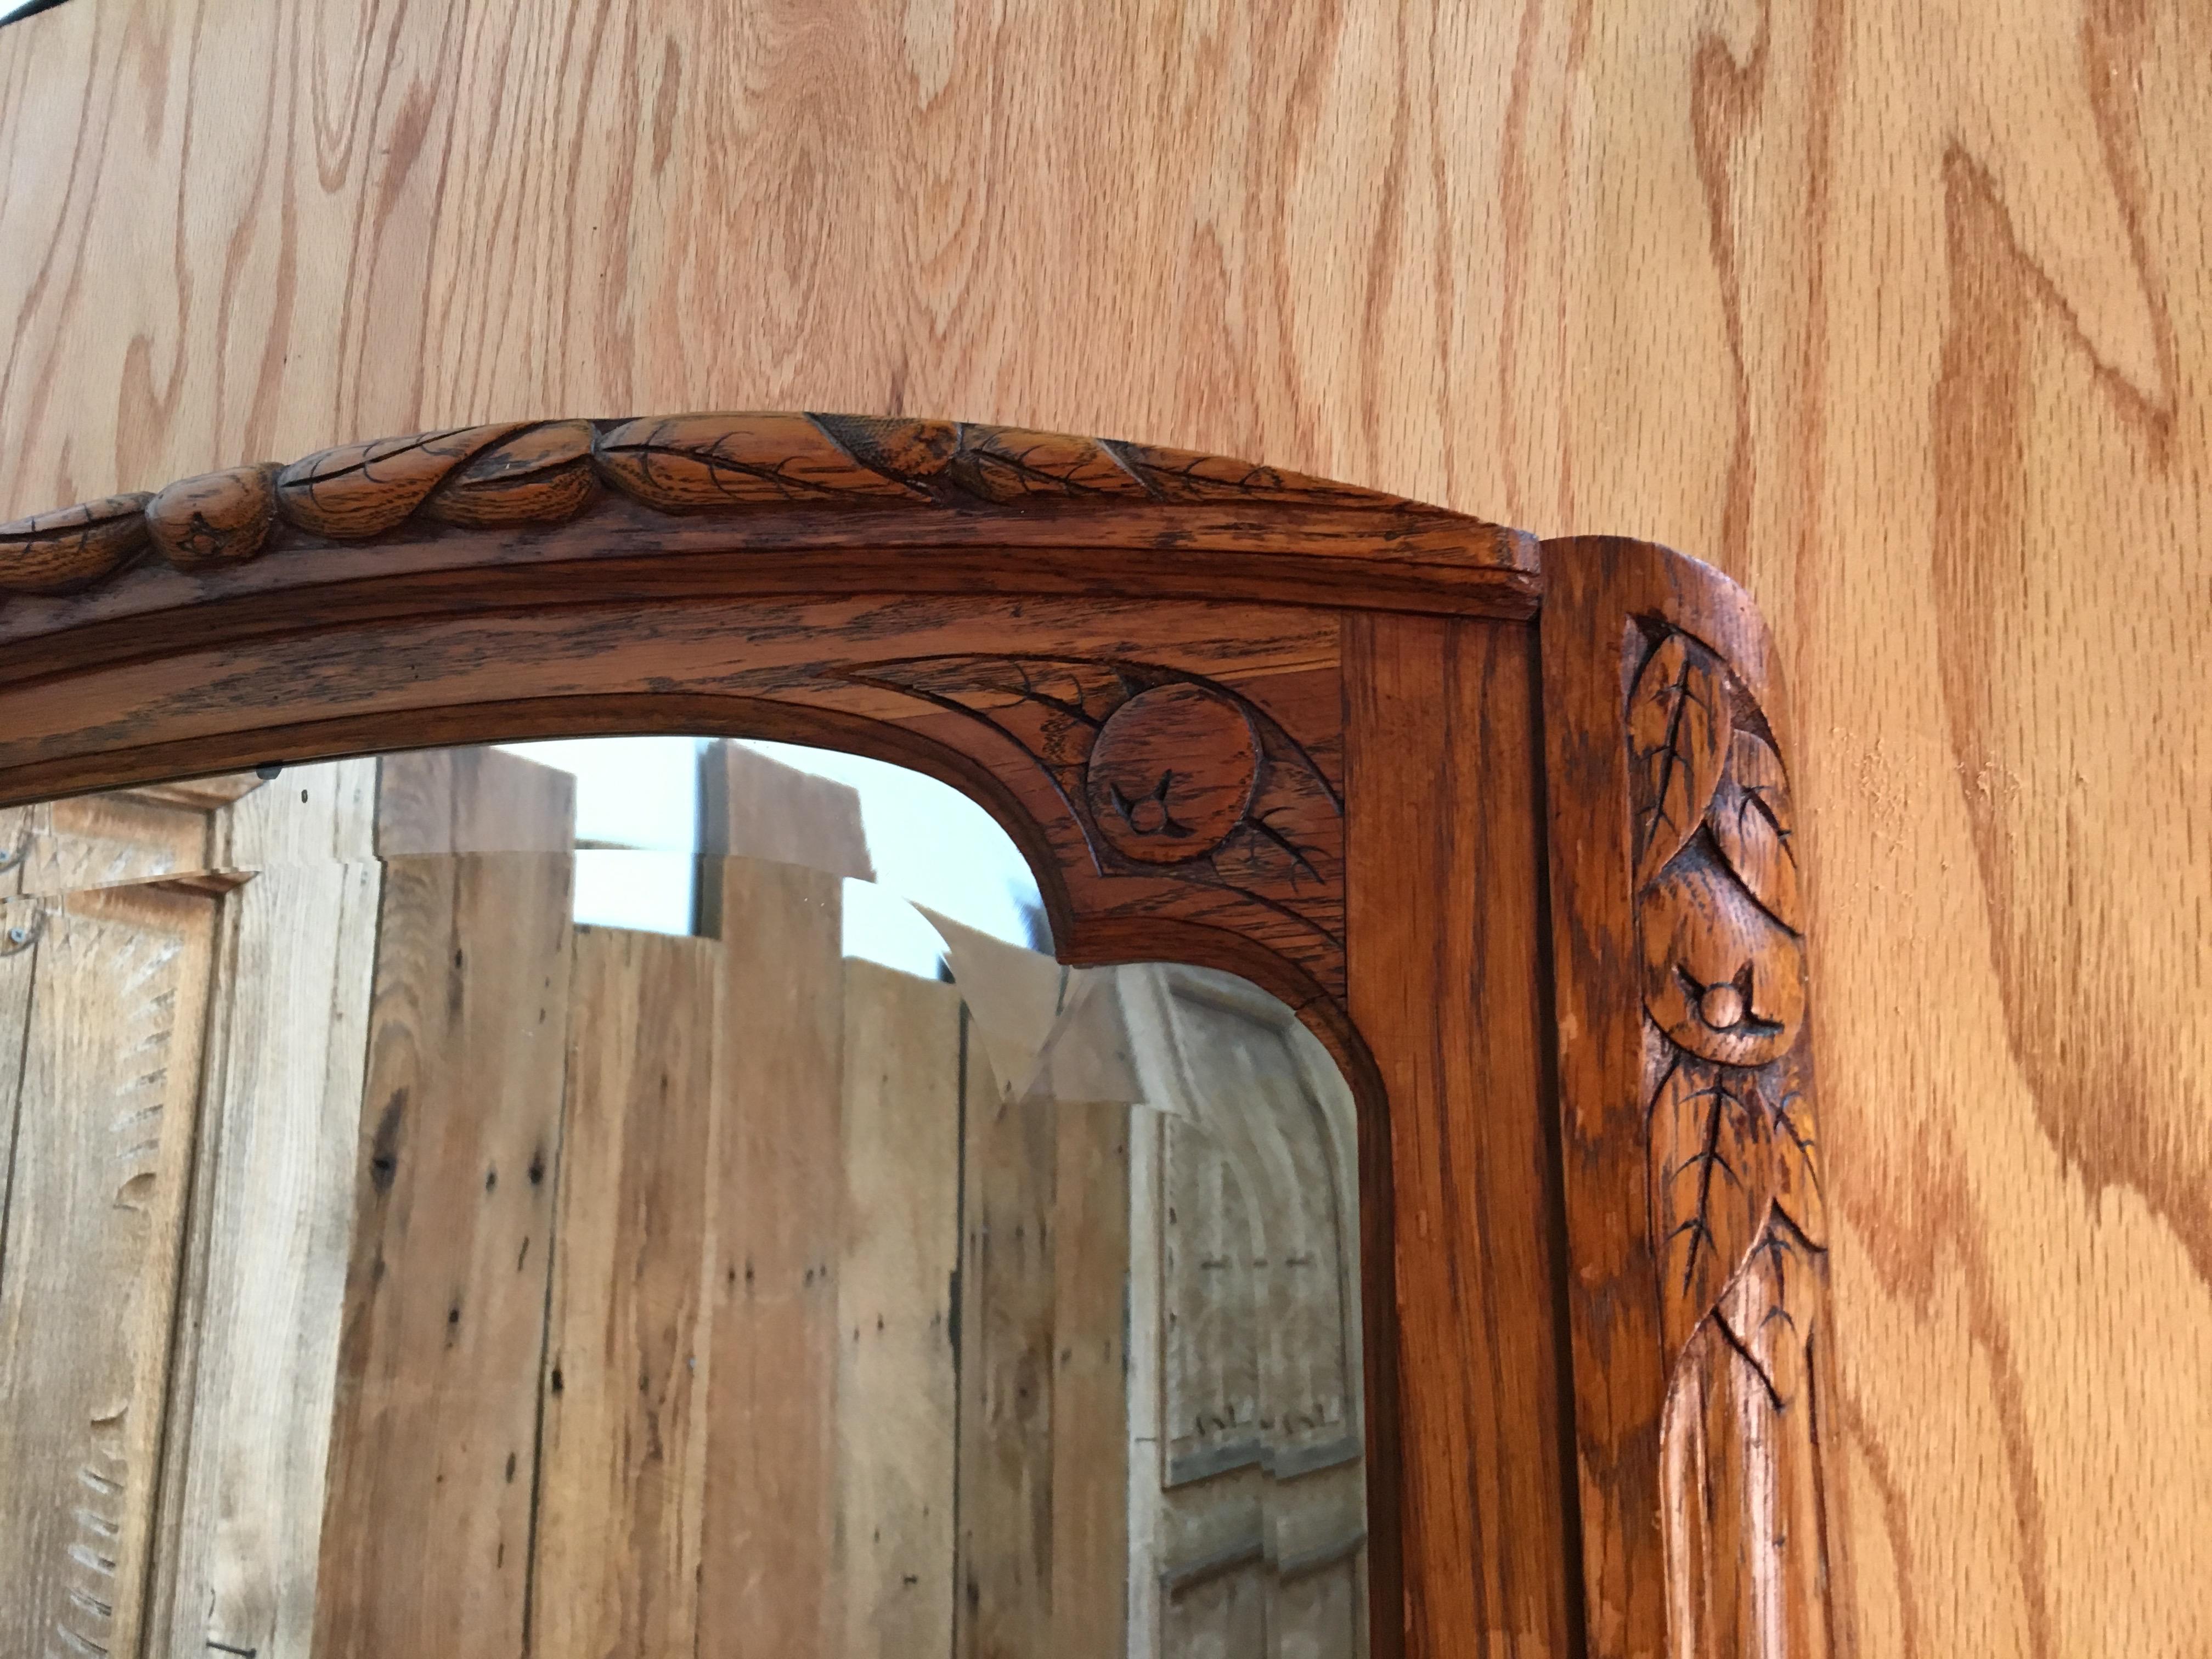 Carved foliage on this Art Deco frame with large beveled mirror.